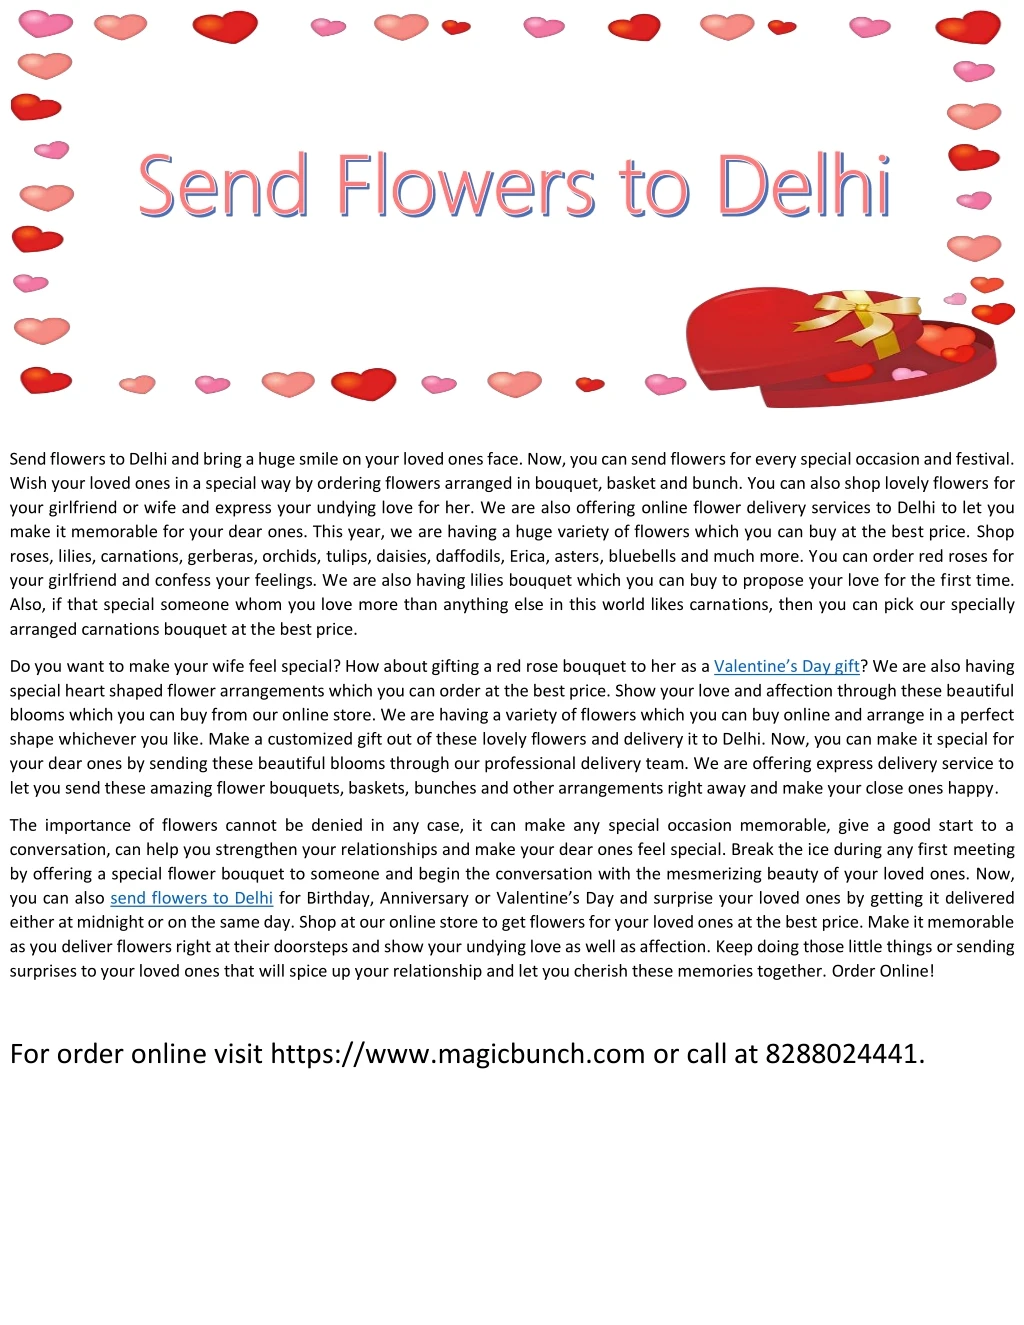 send flowers to delhi and bring a huge smile